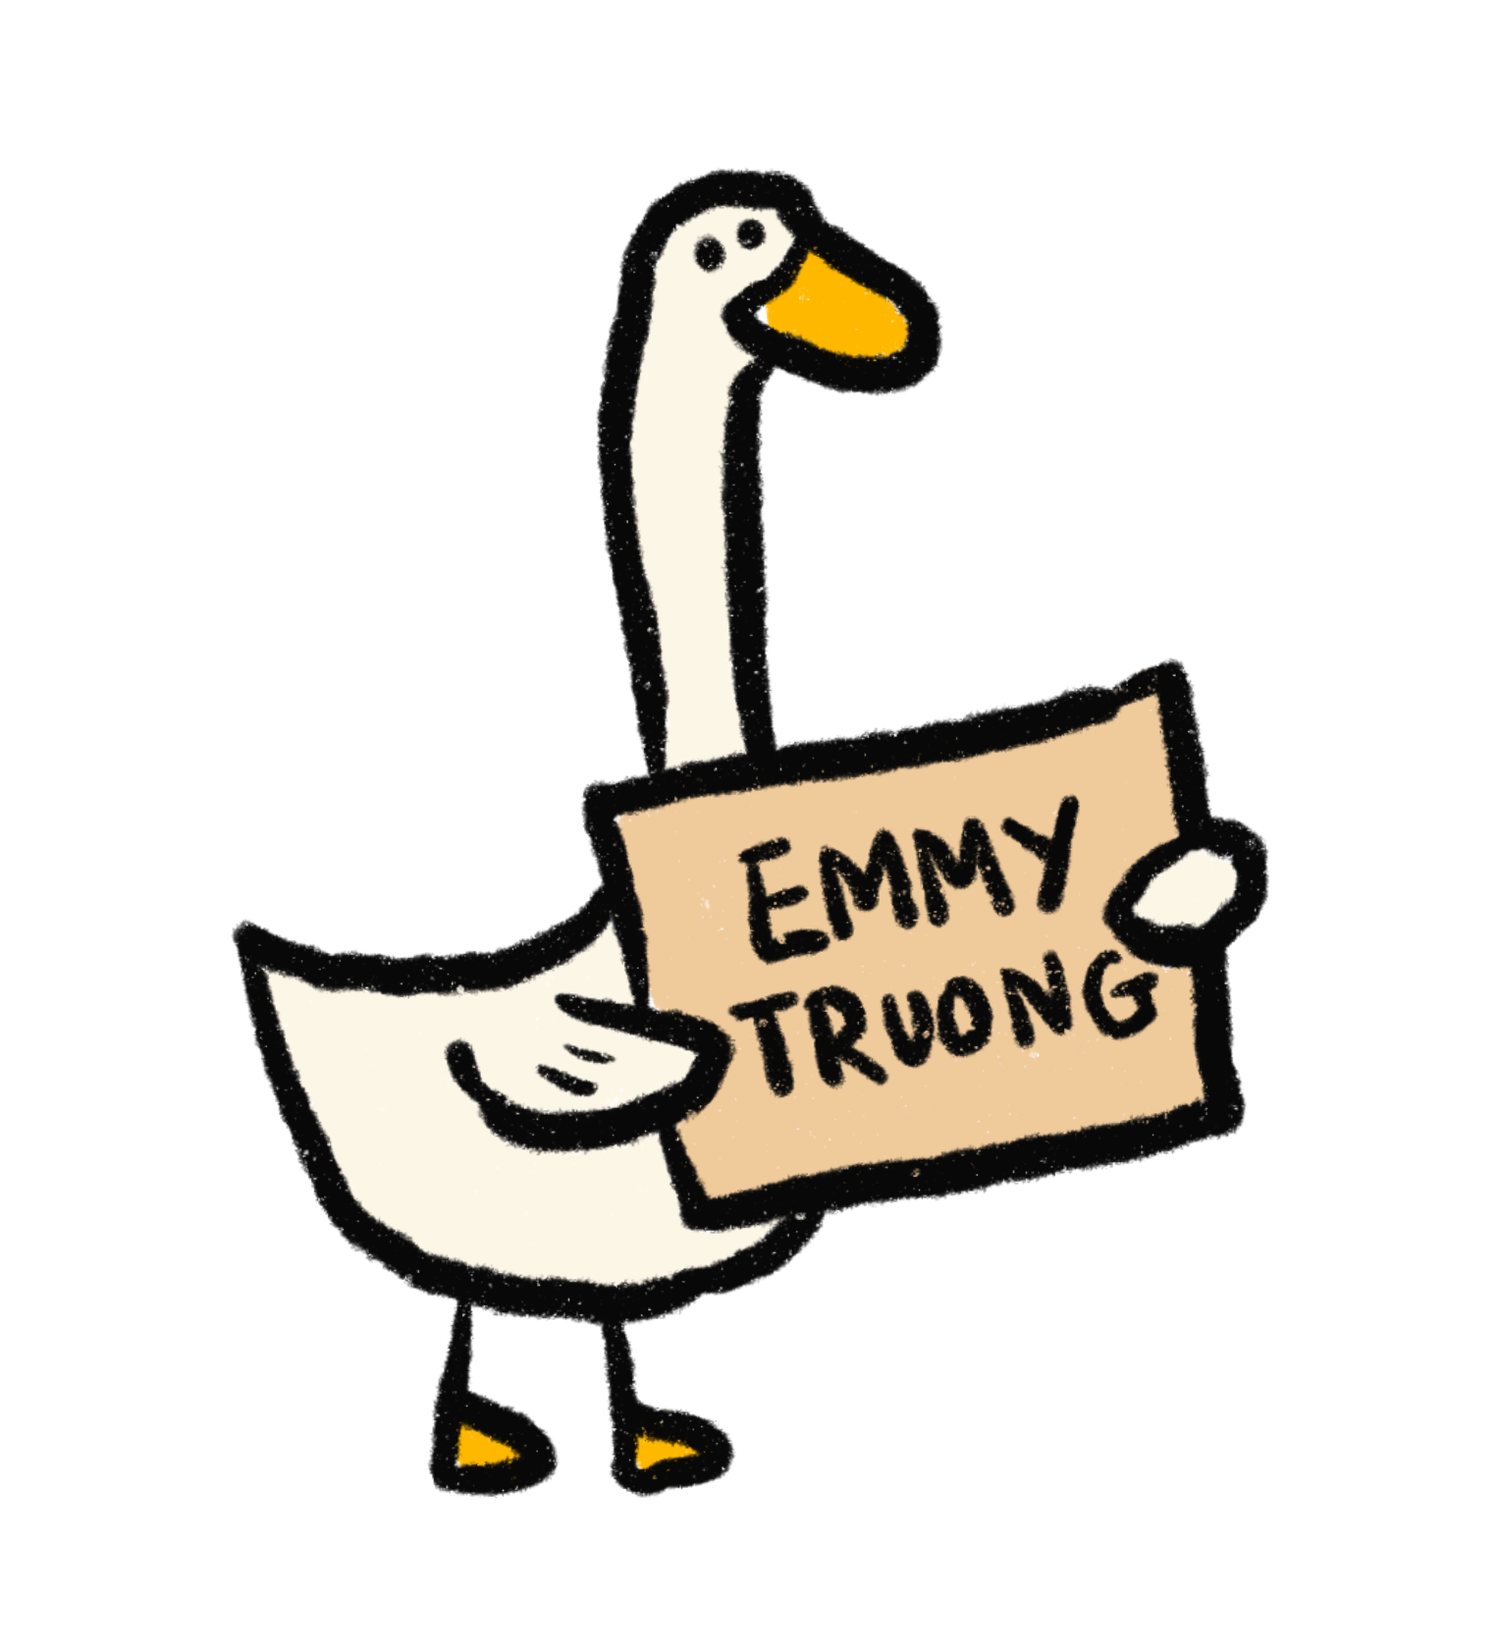 EMMY TRUONG